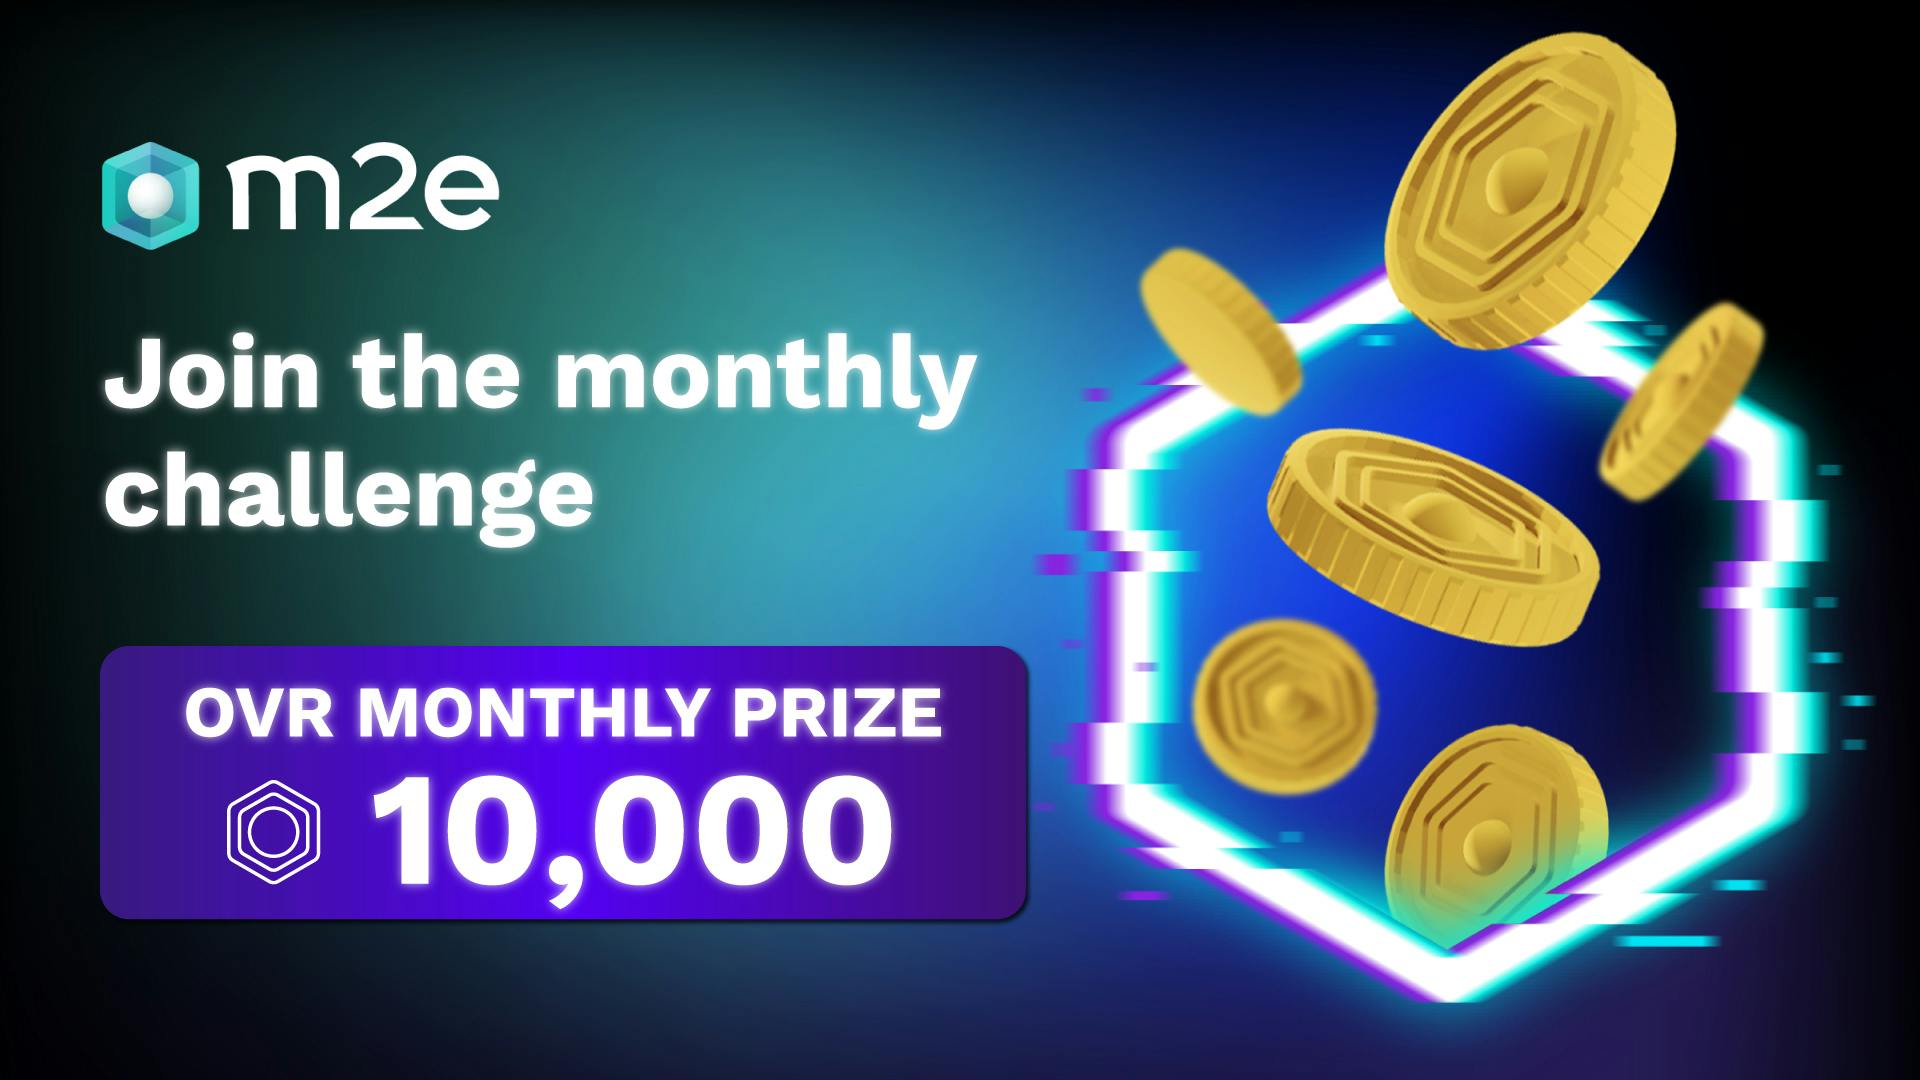 Win 1000 OVR tokens with the monthly map2earn™ challenge